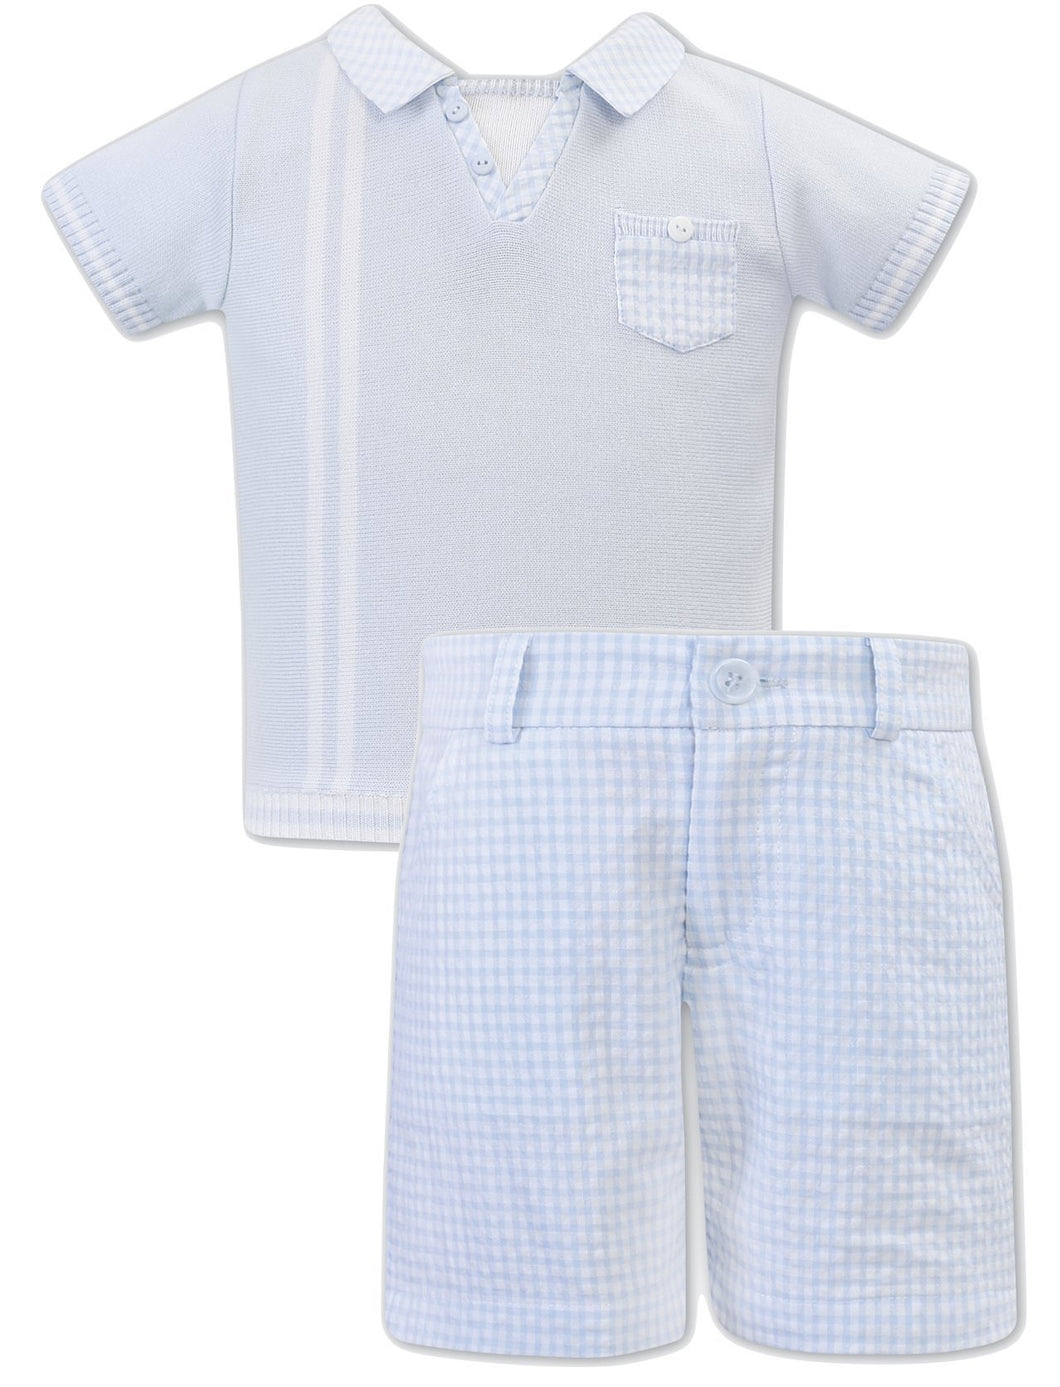 Boys Shorts Set, Short Sleeved Polo Top with Contrasting Collar and Breast Pocket, Stripe Detail, Checked Shorts with Adjustable Waist